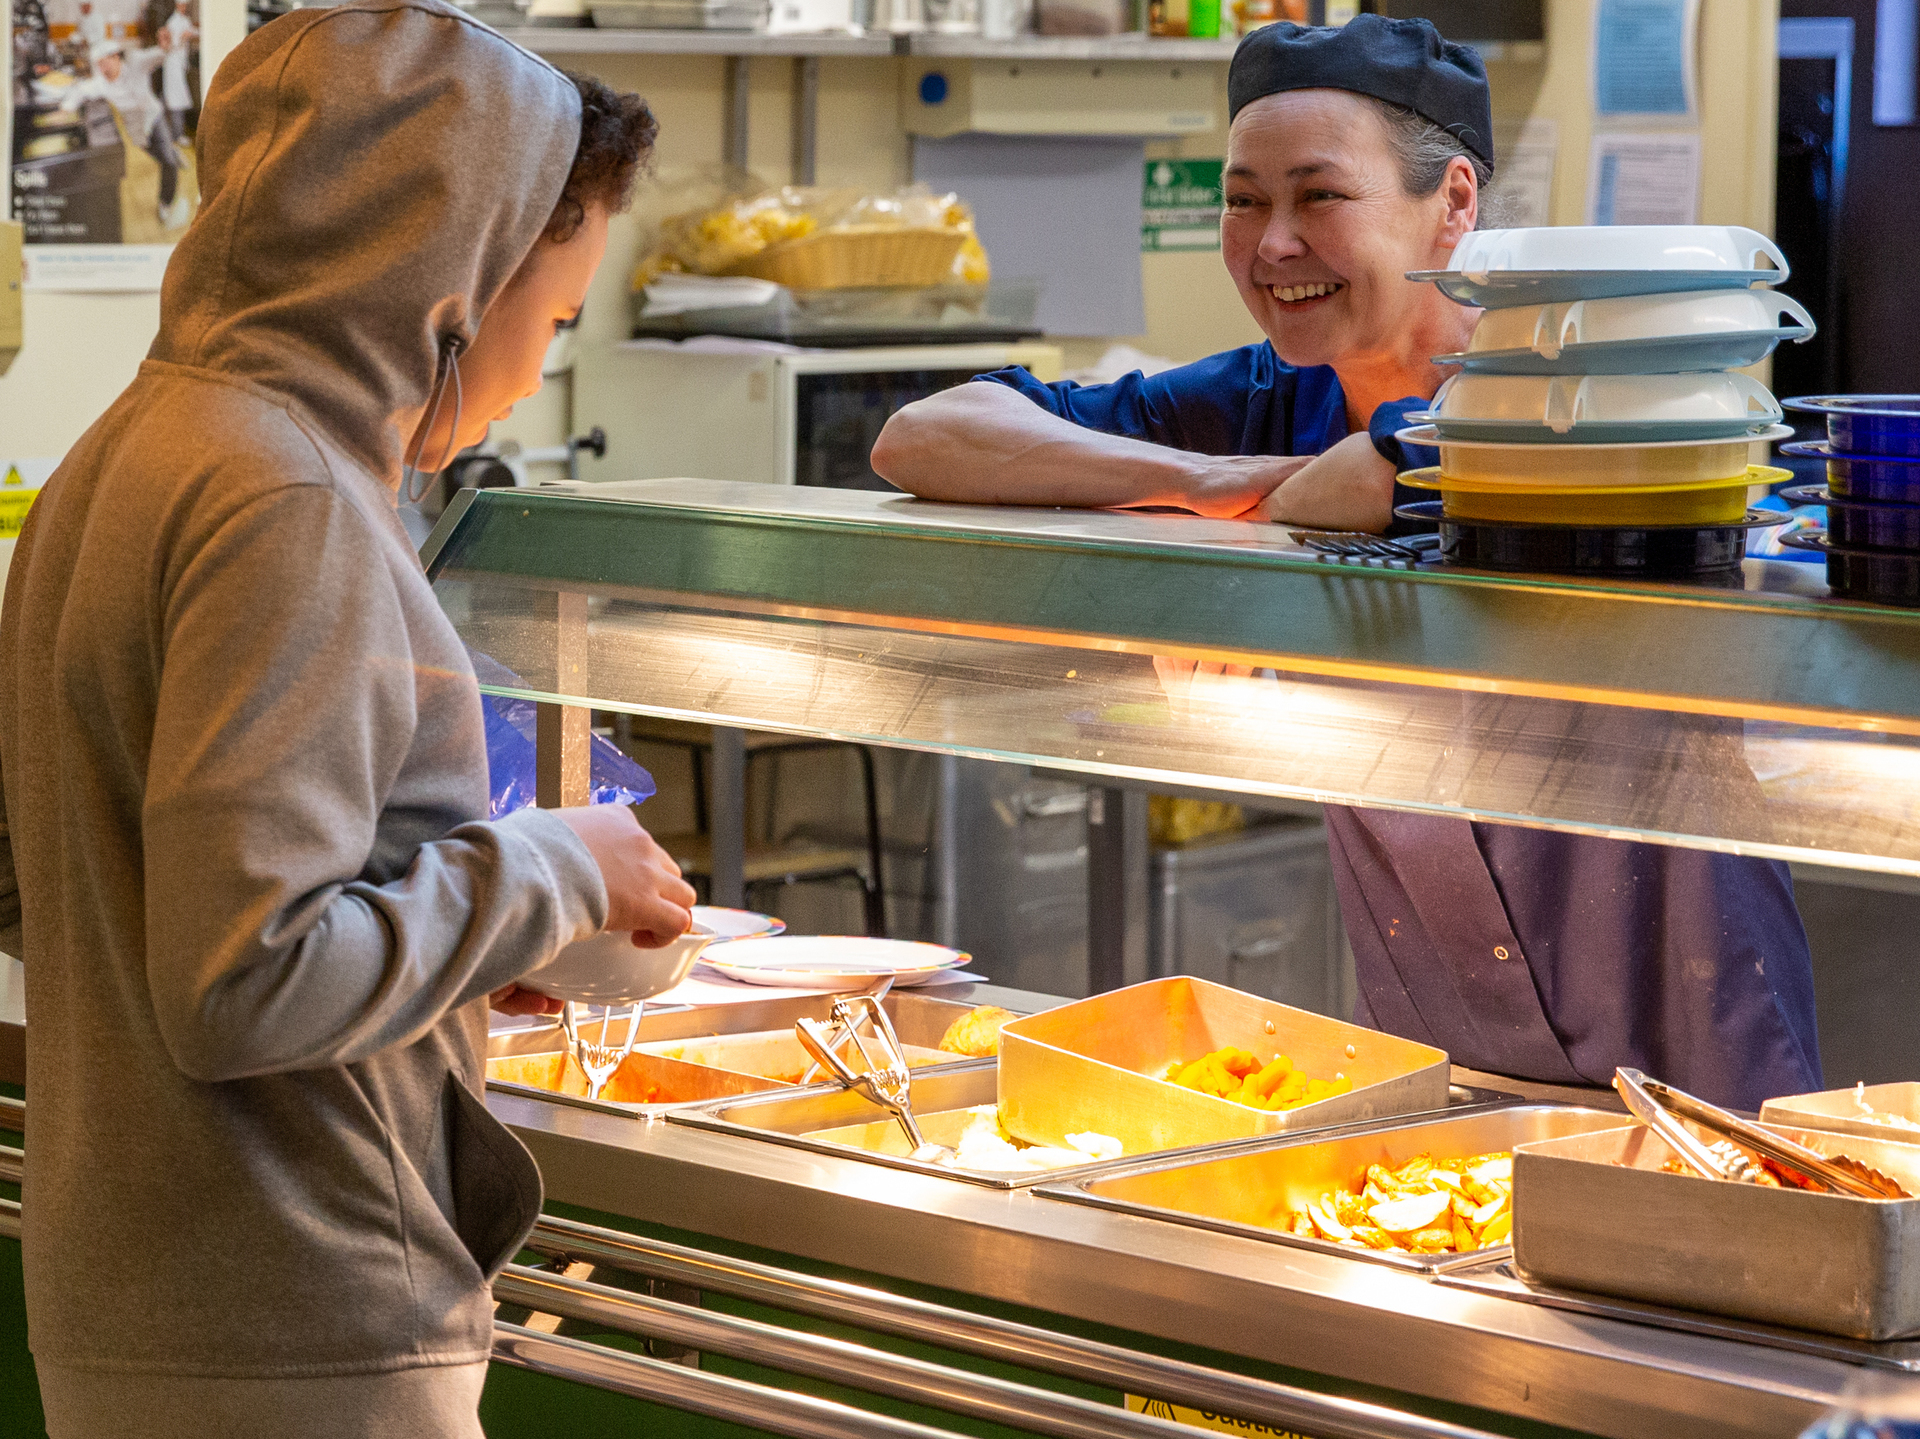 Lunch is served in Chorley at this special education school